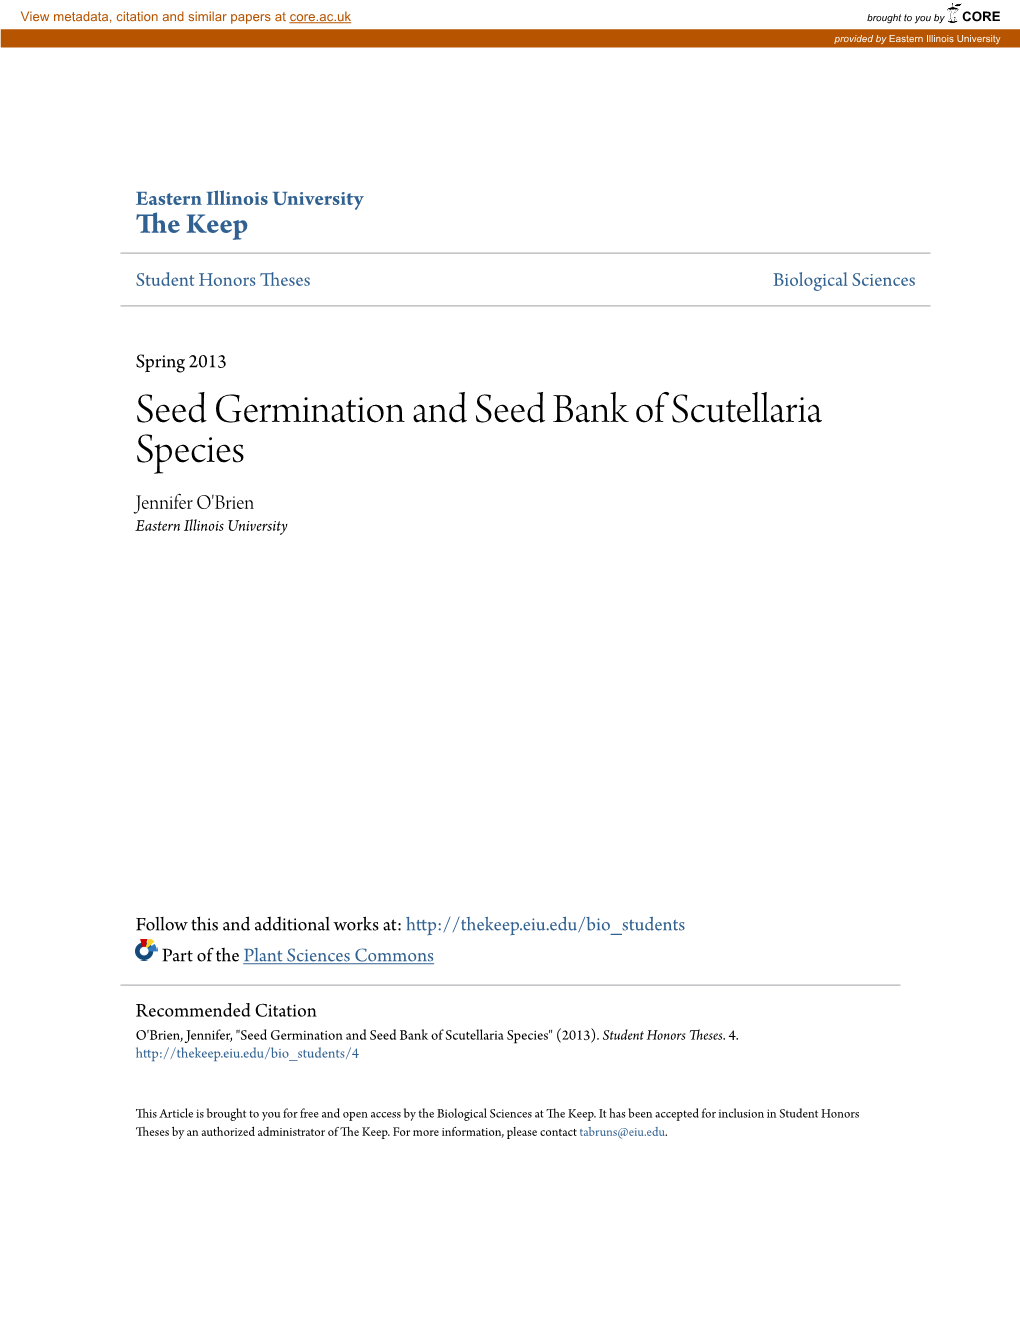 Seed Germination and Seed Bank of Scutellaria Species Jennifer O'brien Eastern Illinois University